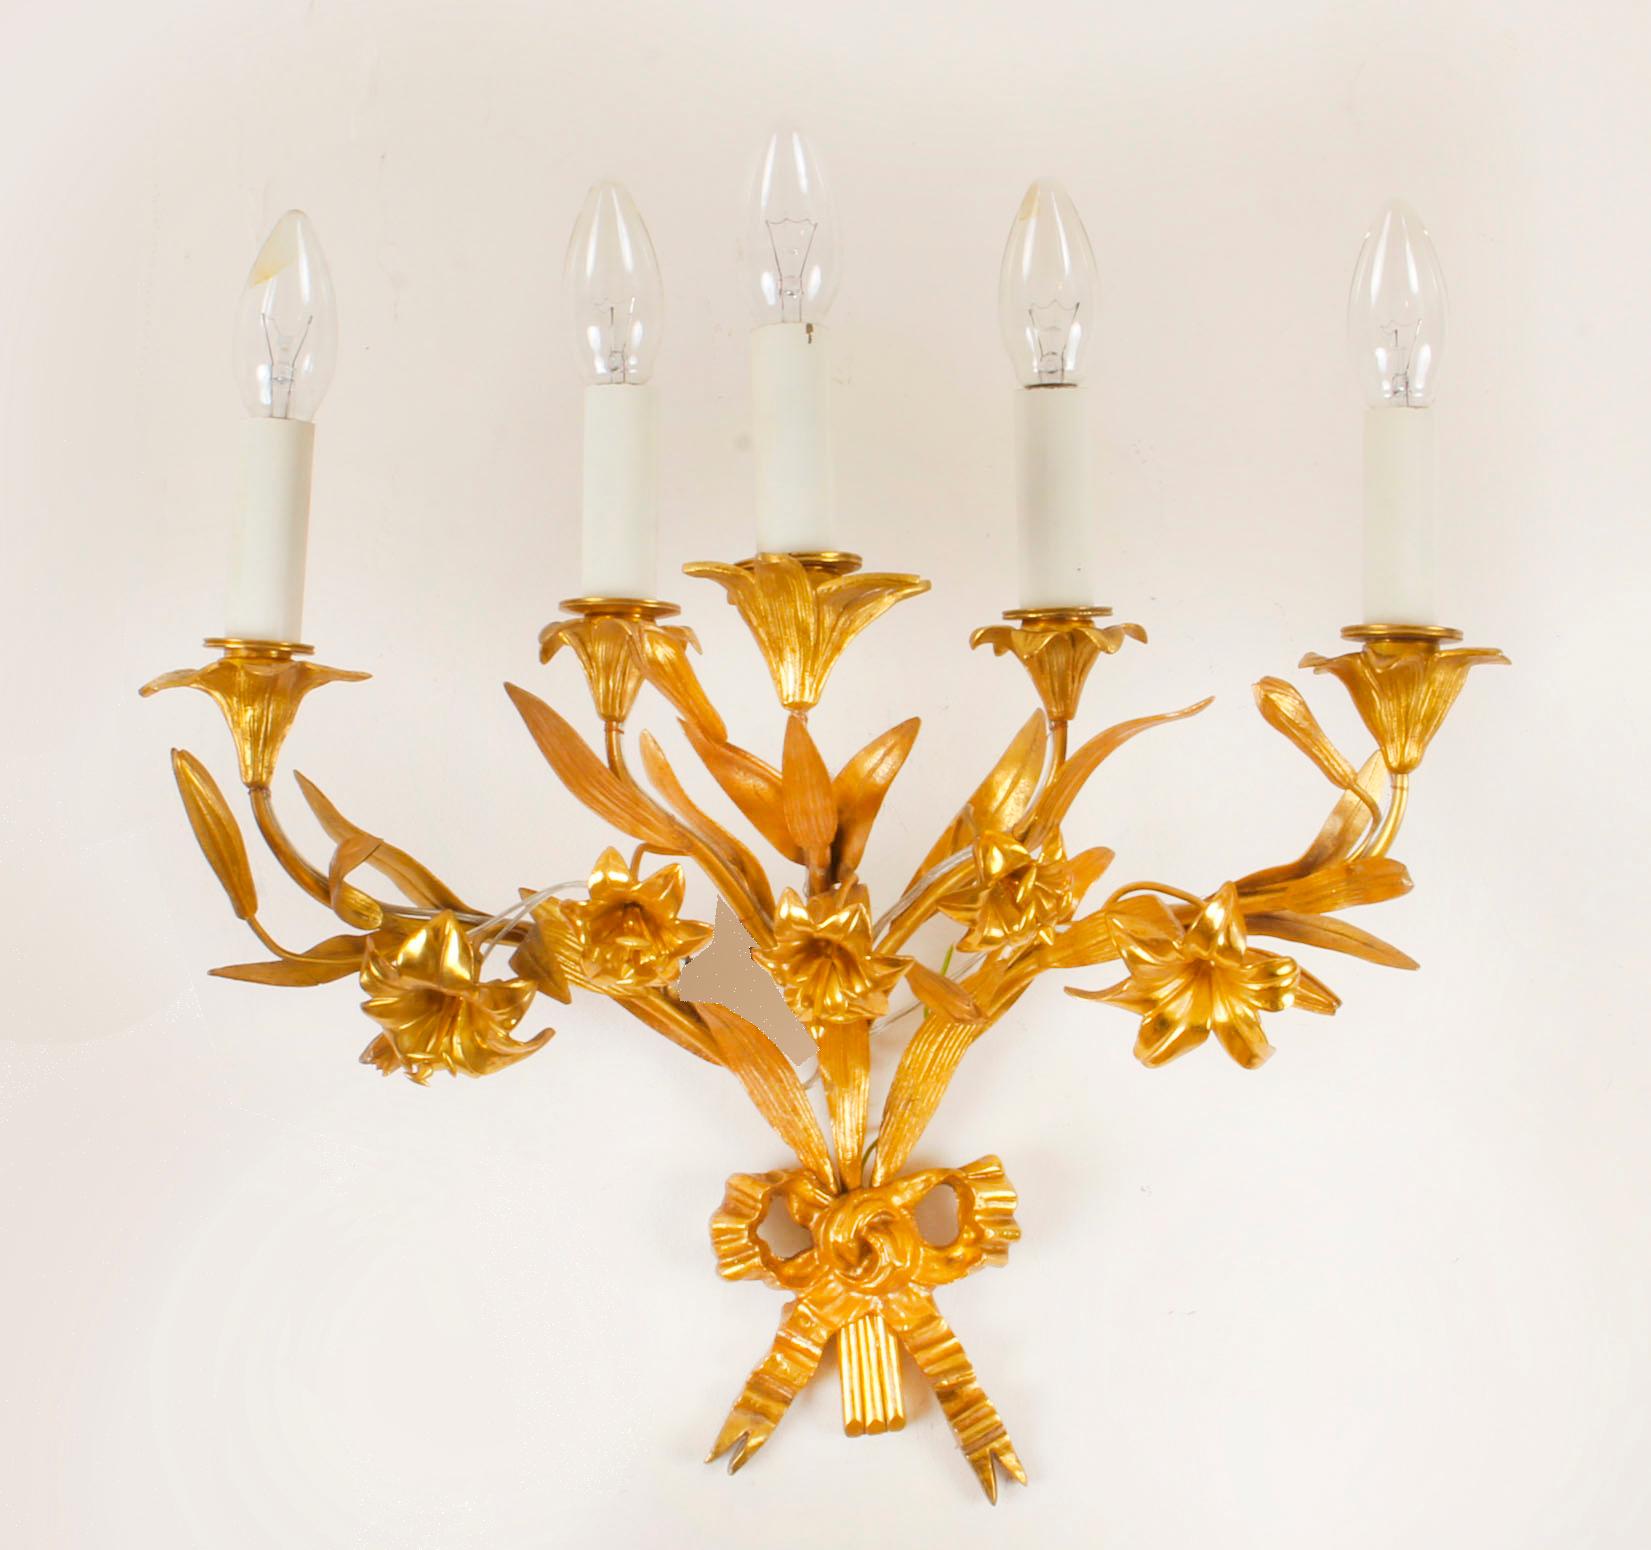 This is a pair of superb antique Louis Revival ormolu five branch wall lights, circa 1920 in date.
 
The lights feature scrolling arms with blossoming foliate and floral ornamentation, including the drip pans with a ribbon and bow to the base.
